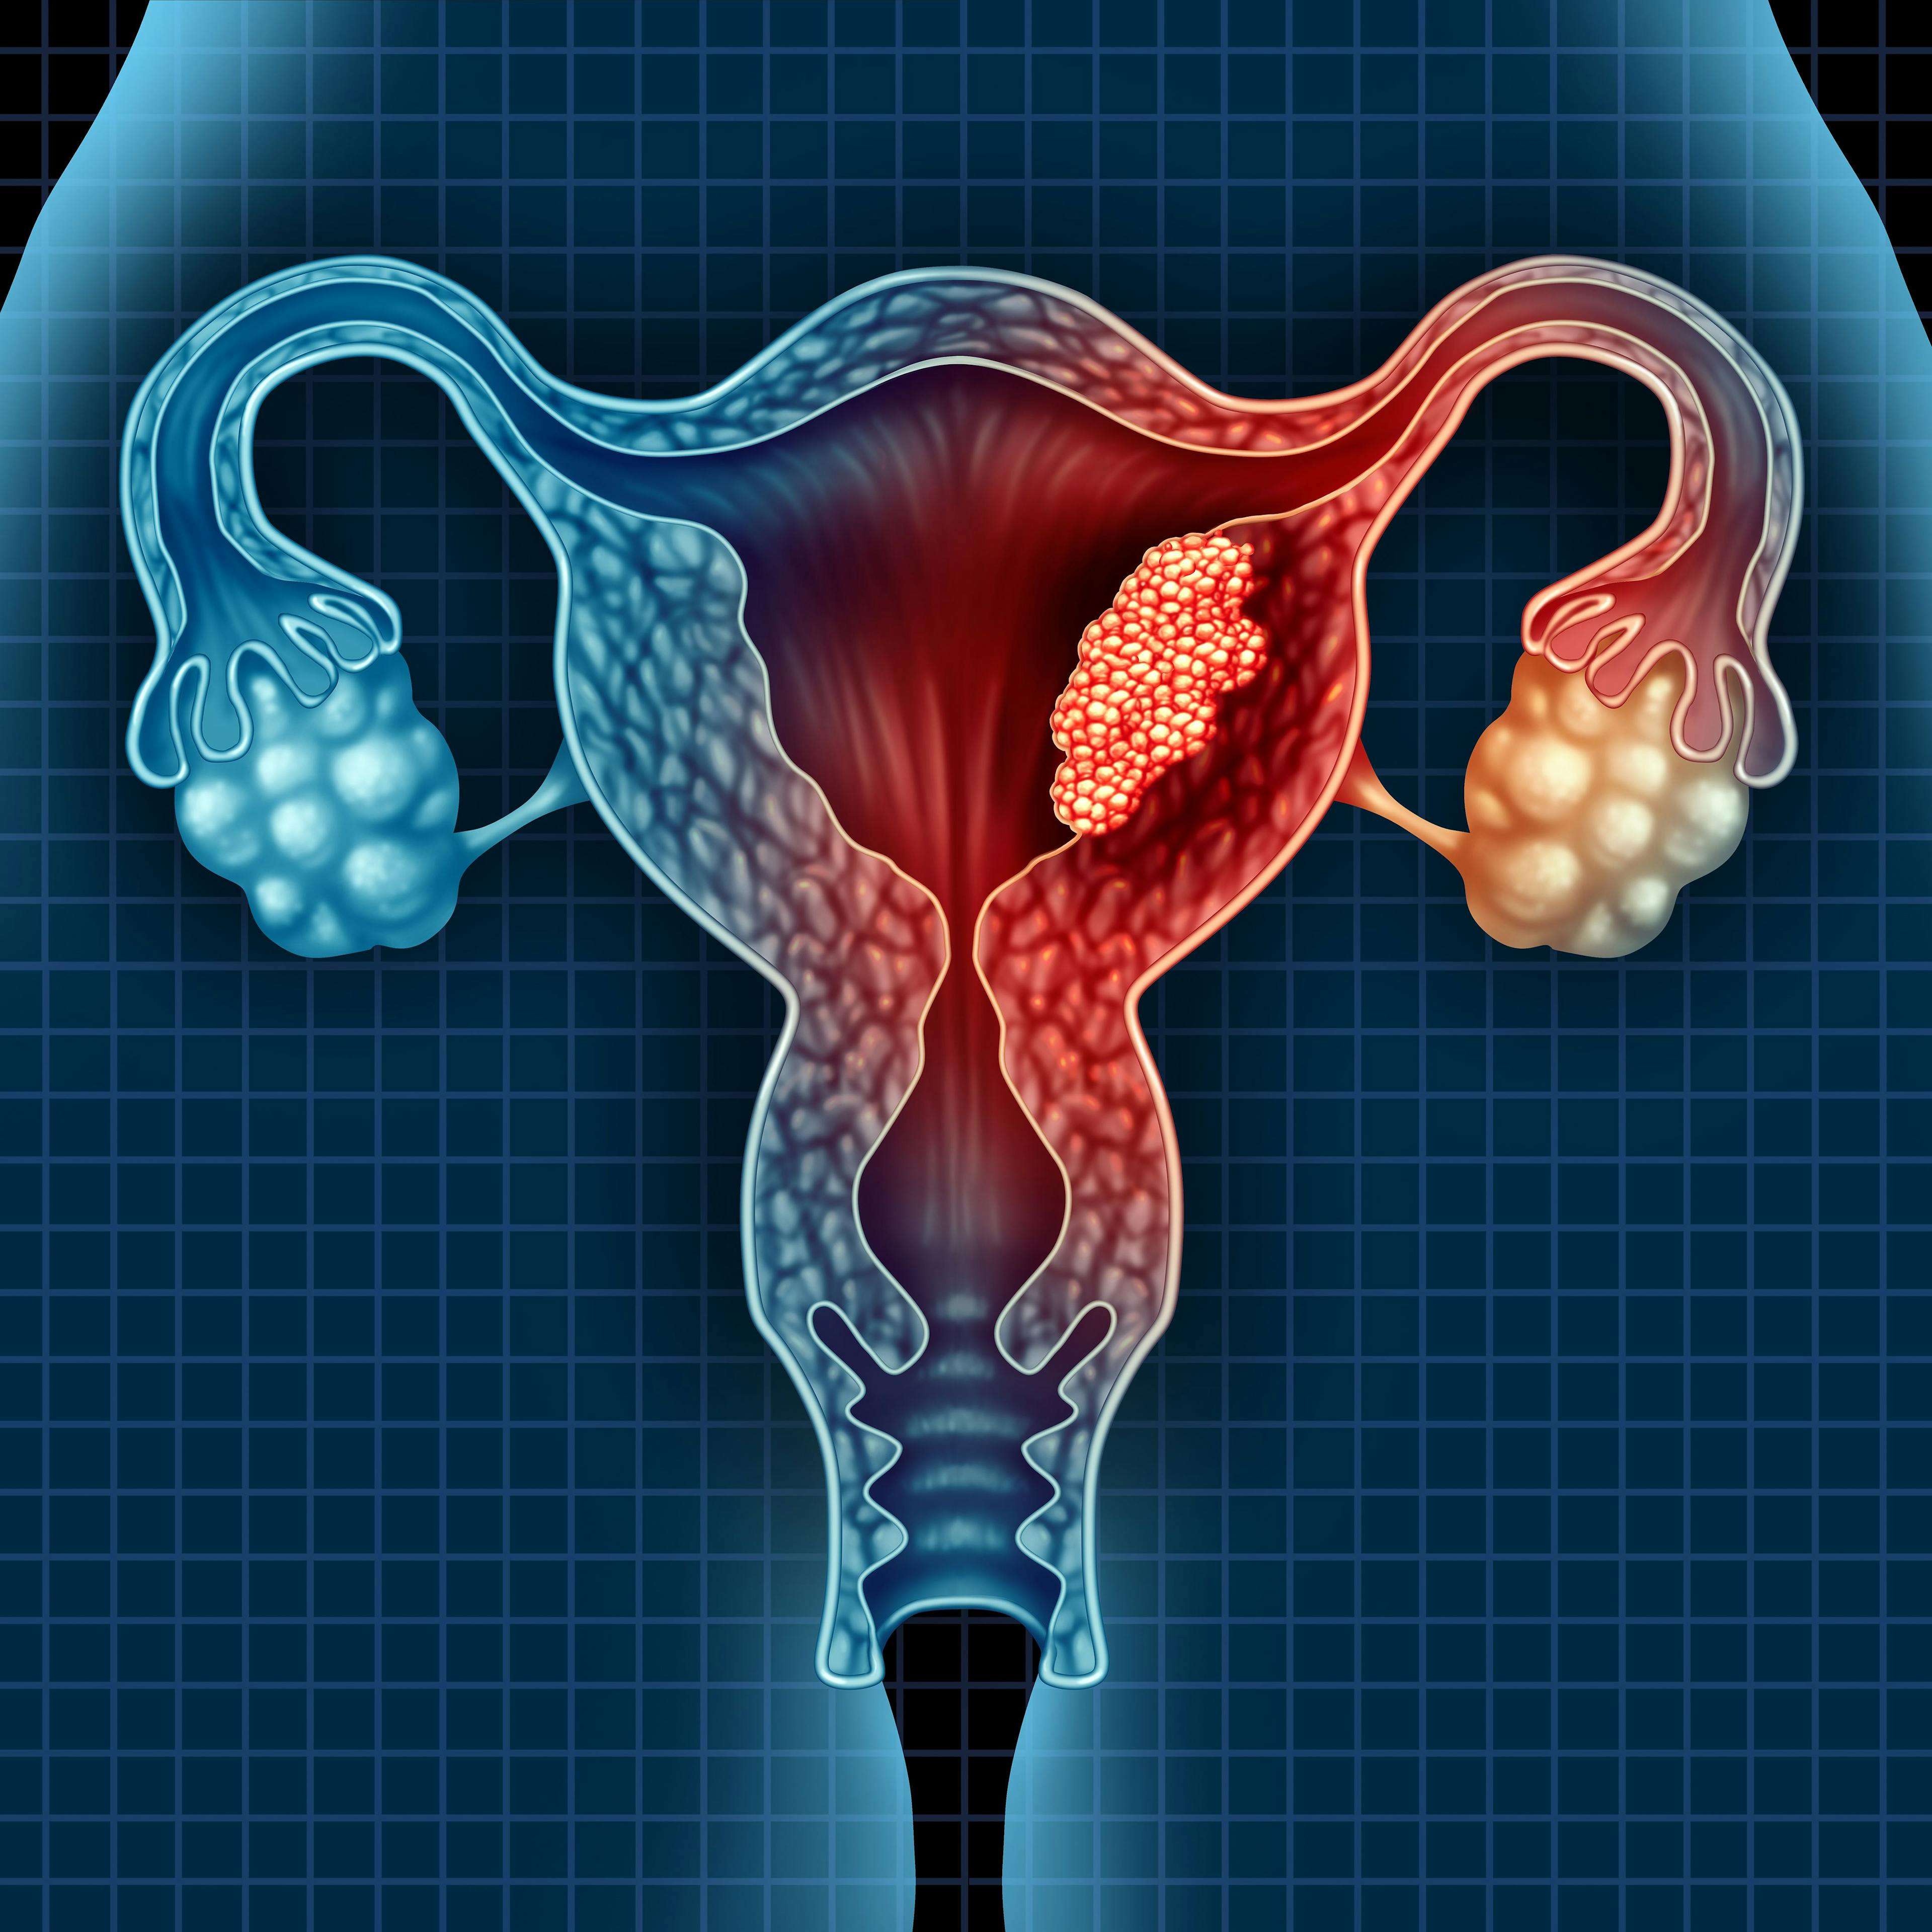 Patients with advanced endometrial cancer derived a more notable survival benefit after being treated with lenvatinib and pembrolizumab compared with chemotherapy alone.